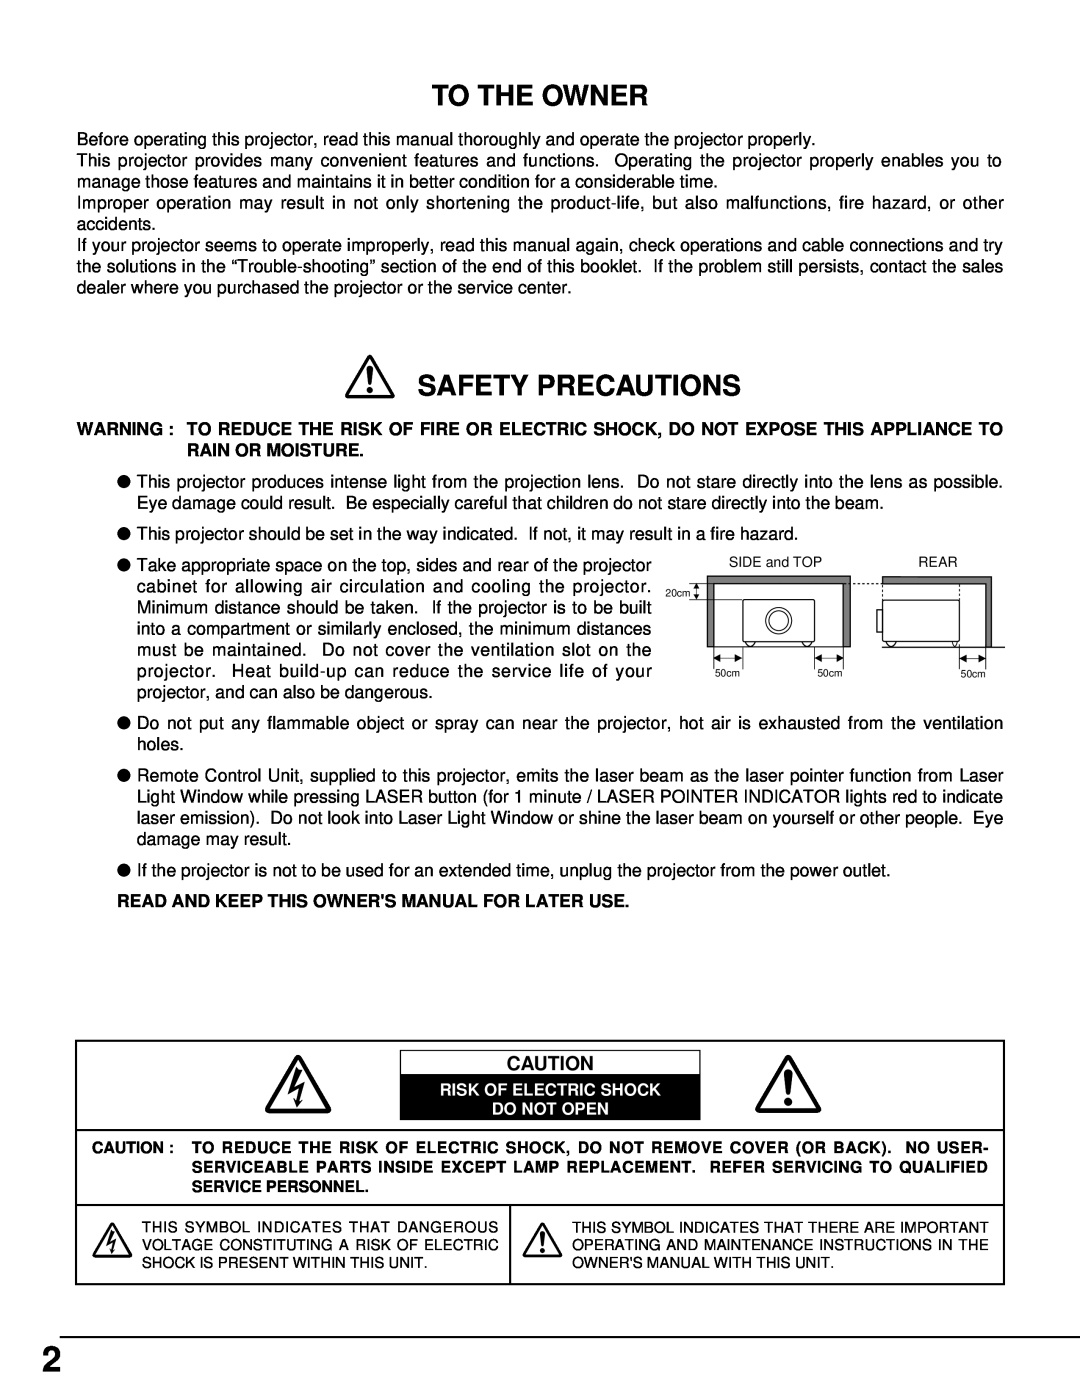 BOXLIGHT cp-12t manual To The Owner, Safety Precautions, Read And Keep This Owners Manual For Later Use 